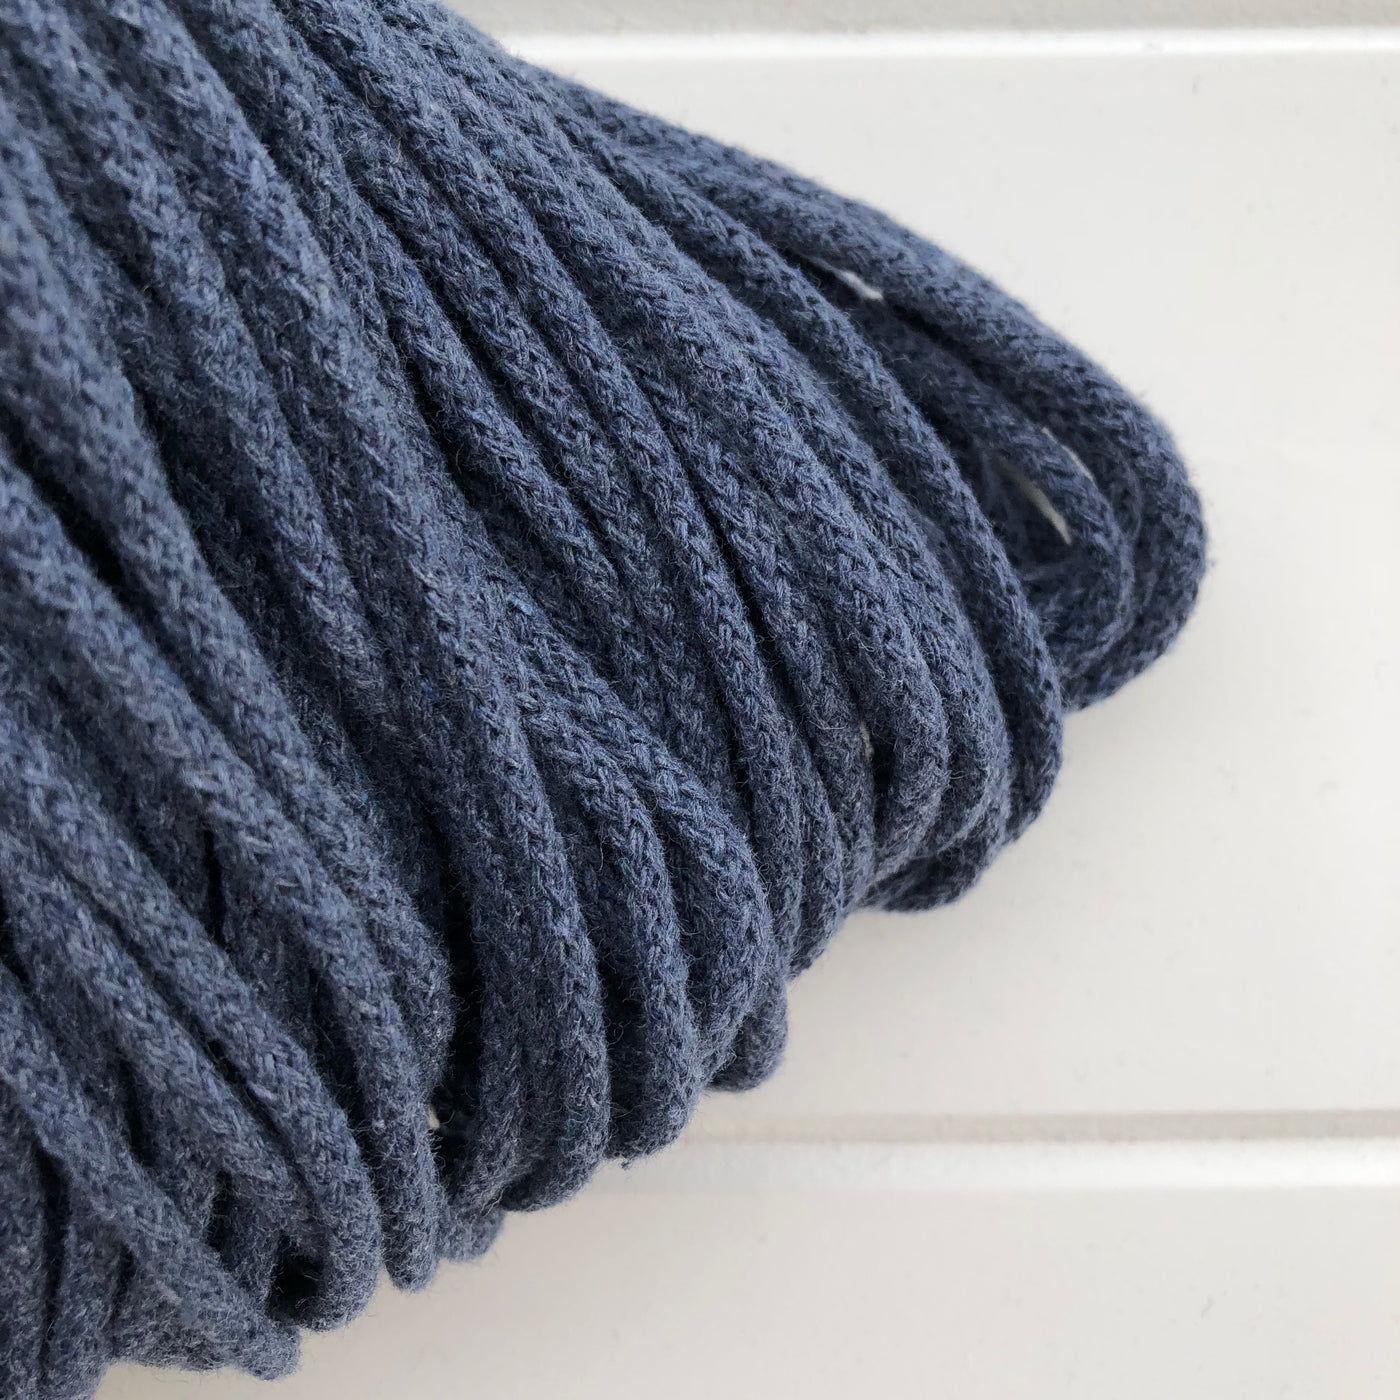 Where can I find Bobbiny Braided Cords Bobbiny Junior 3mm - 100m Jeans? These beautiful Bobbiny ropes are made in Poland, and are non-toxic and certified safe for children, meeting certified worldwide textile standards.  3mm Diameter  100 metres Length  Recommended for use with 8-10mm crochet or knitting needles  Cotton inner and outer layers, perfect for use with Macrame, Crochet or Knitting.   